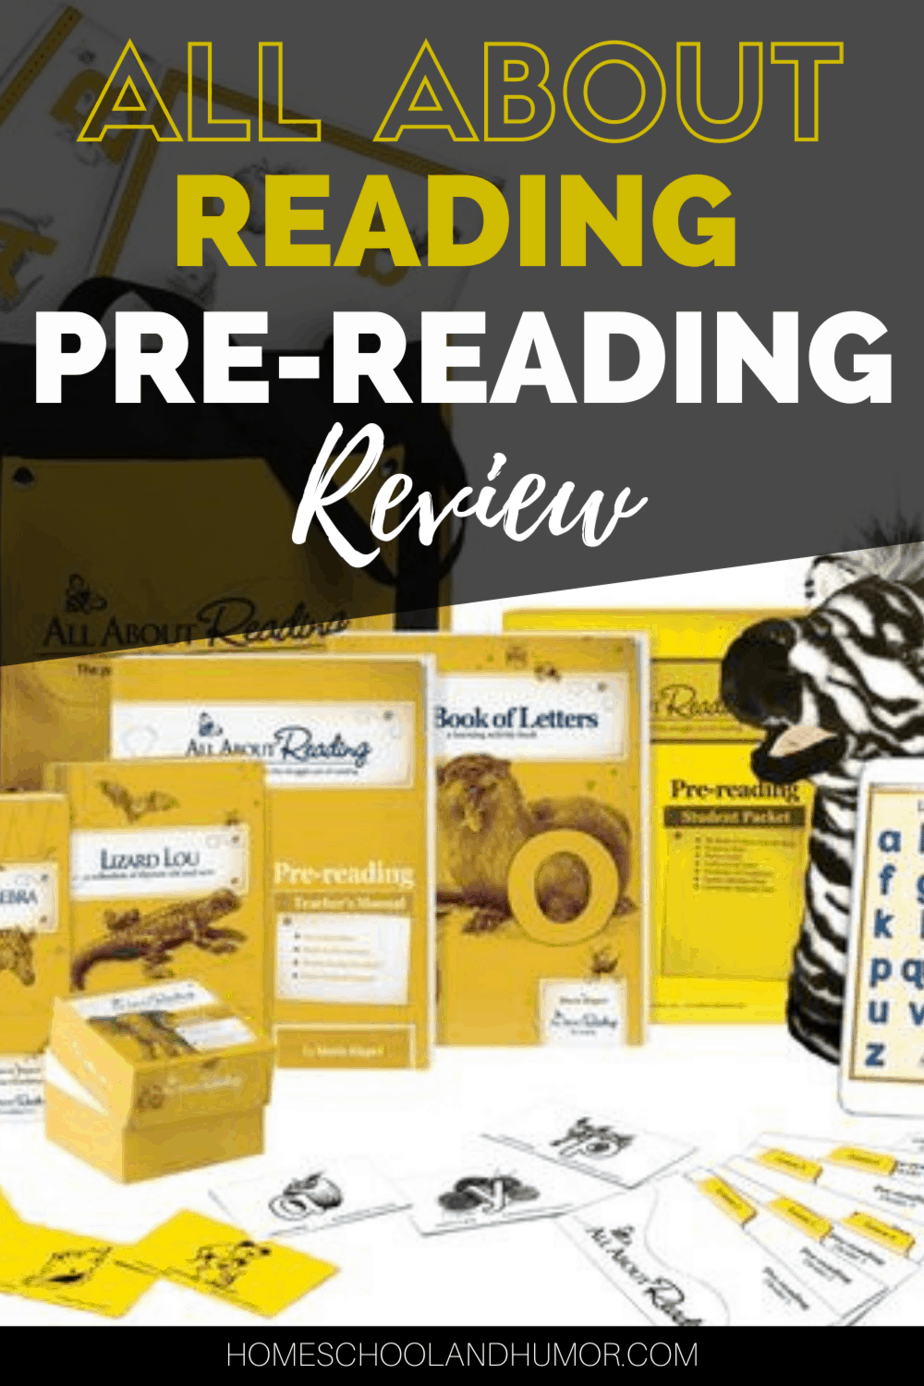 How We Use All About Reading Pre-Reading Program 2021 (Review)